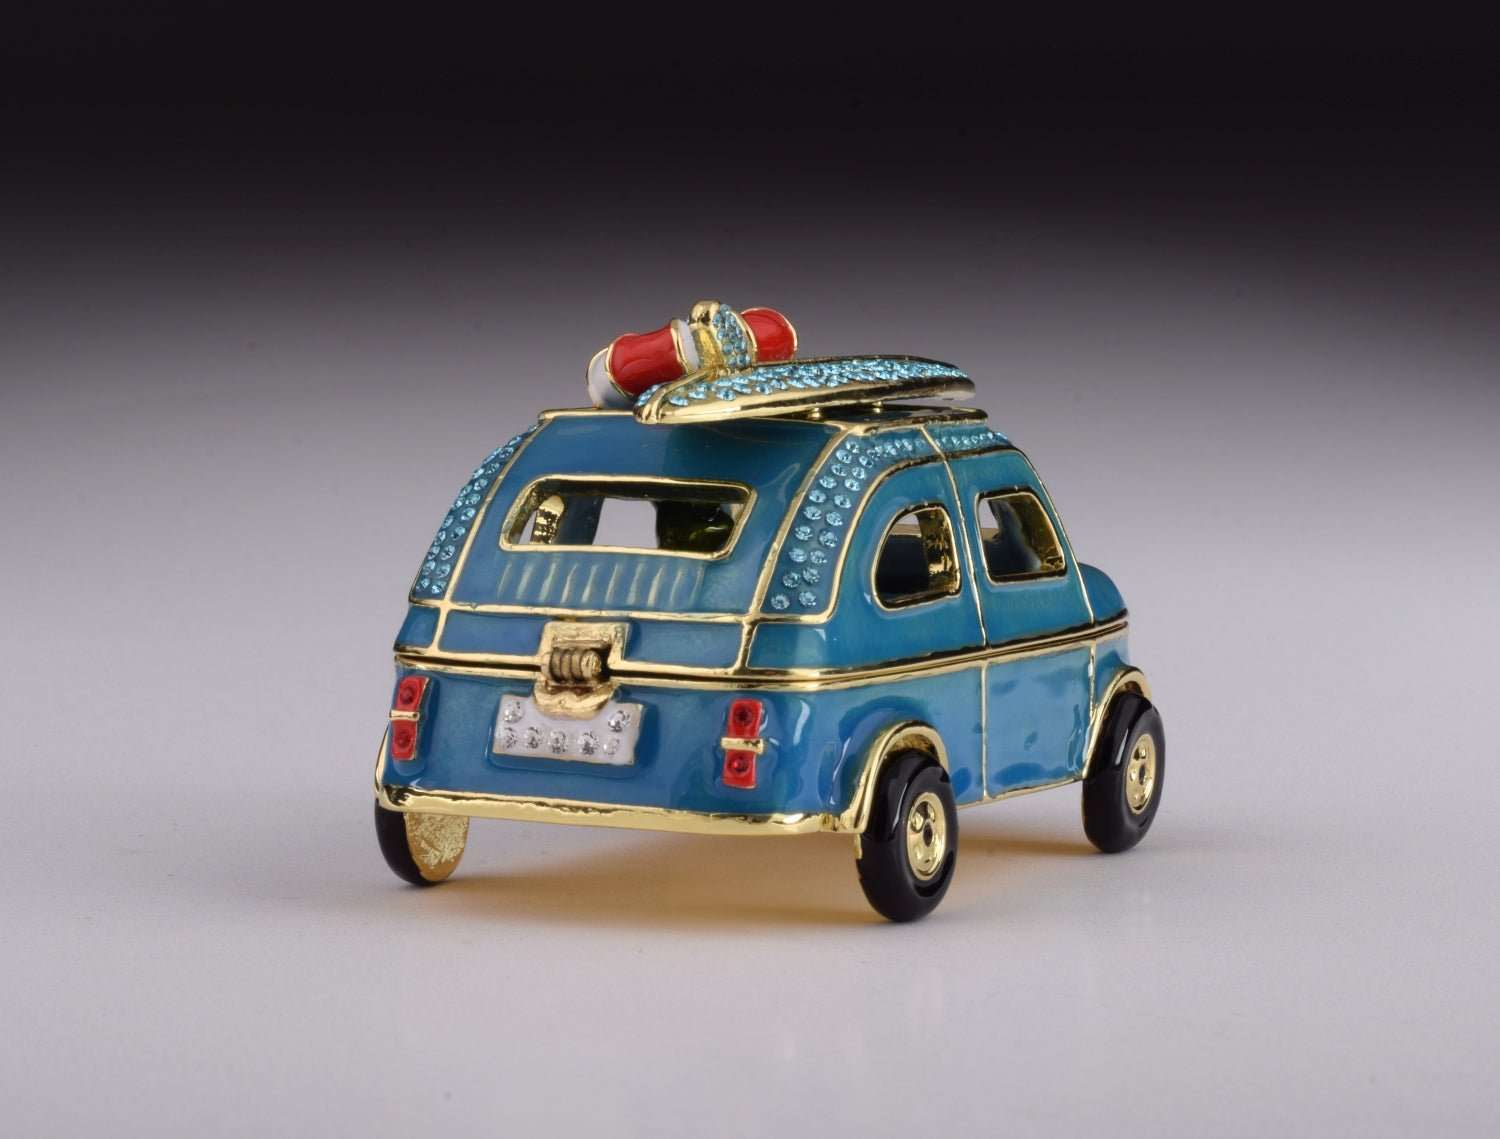 Blue Surfing Car with Surfboard | Treasures of my HeART